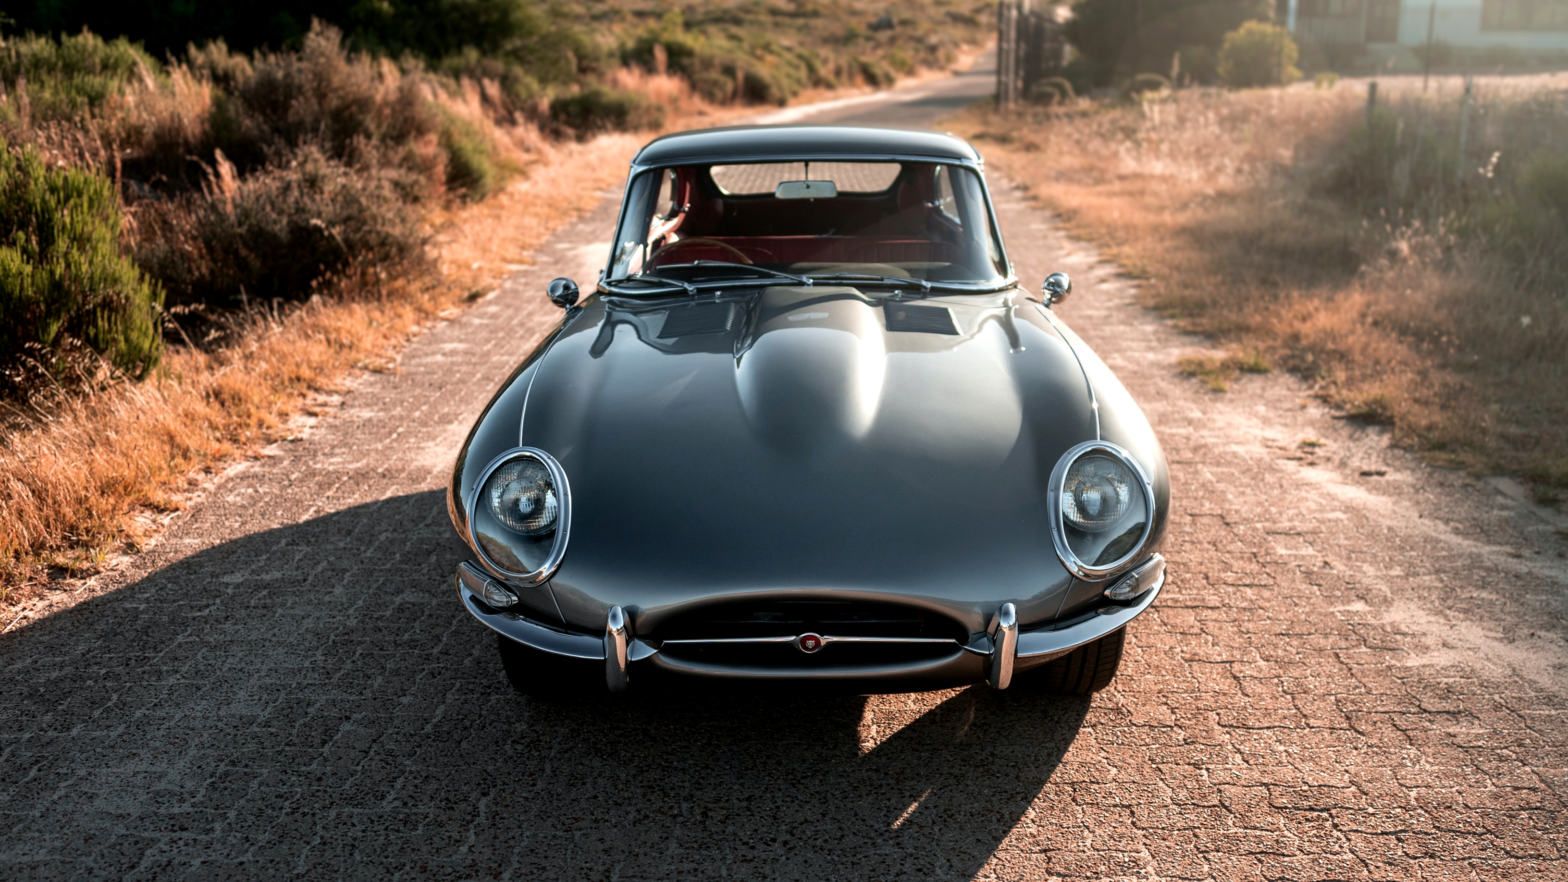 The 1966 Jaguar E-Type, often hailed as one of the most beautiful cars ever made, represents a pinnacle of automotive design and engineering.